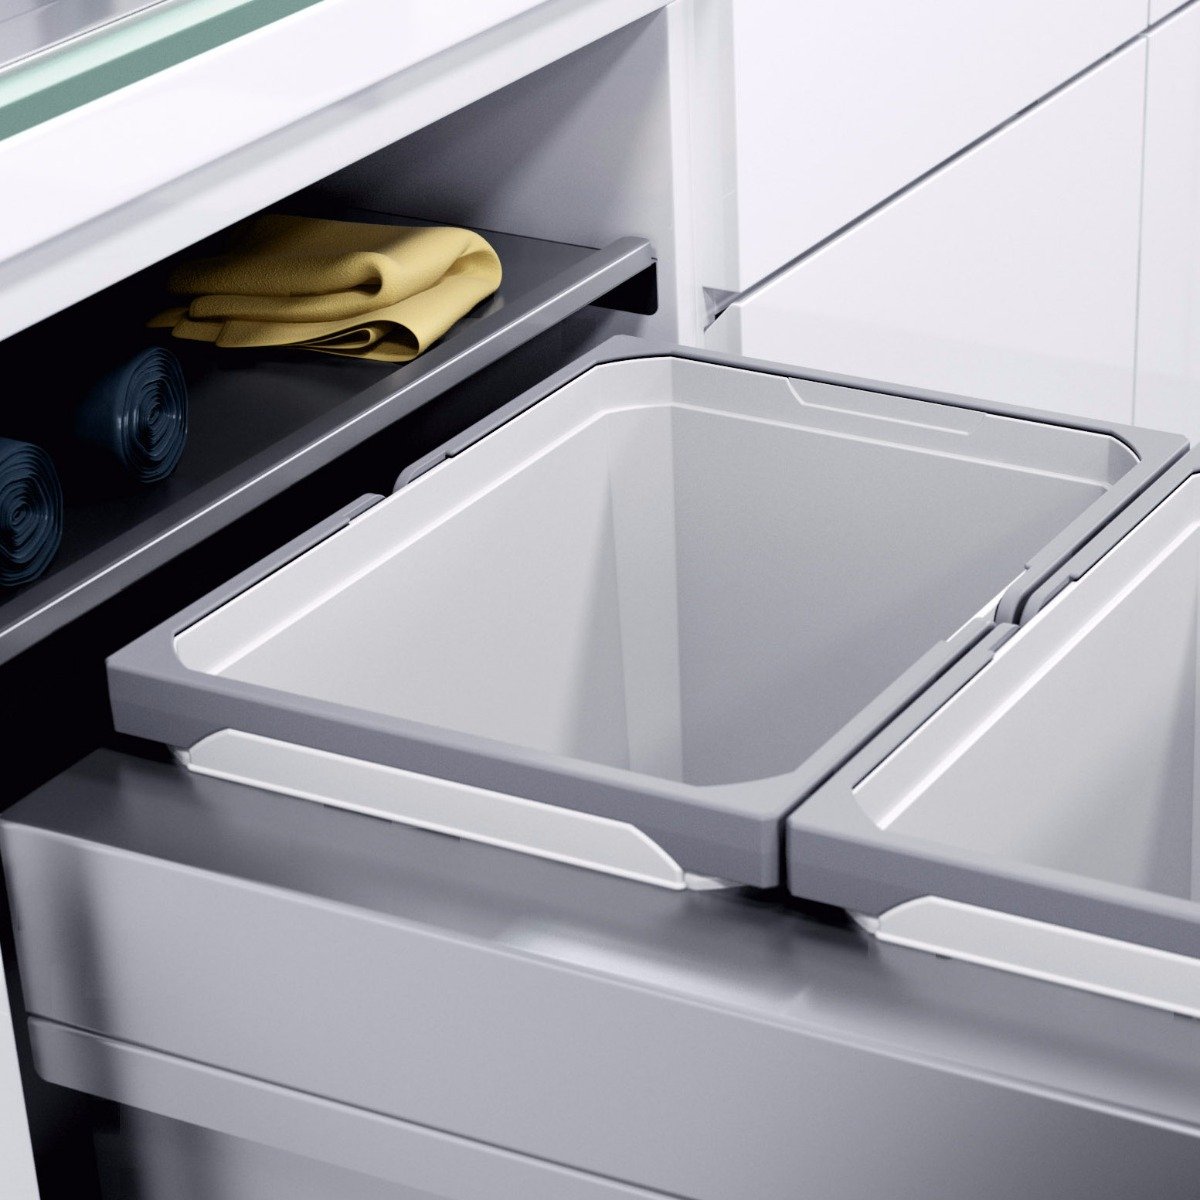 A well-designed integrated kitchen recycling bin from Vauth-Sagel with two compartments, providing 64 litres of waste and recycling space.